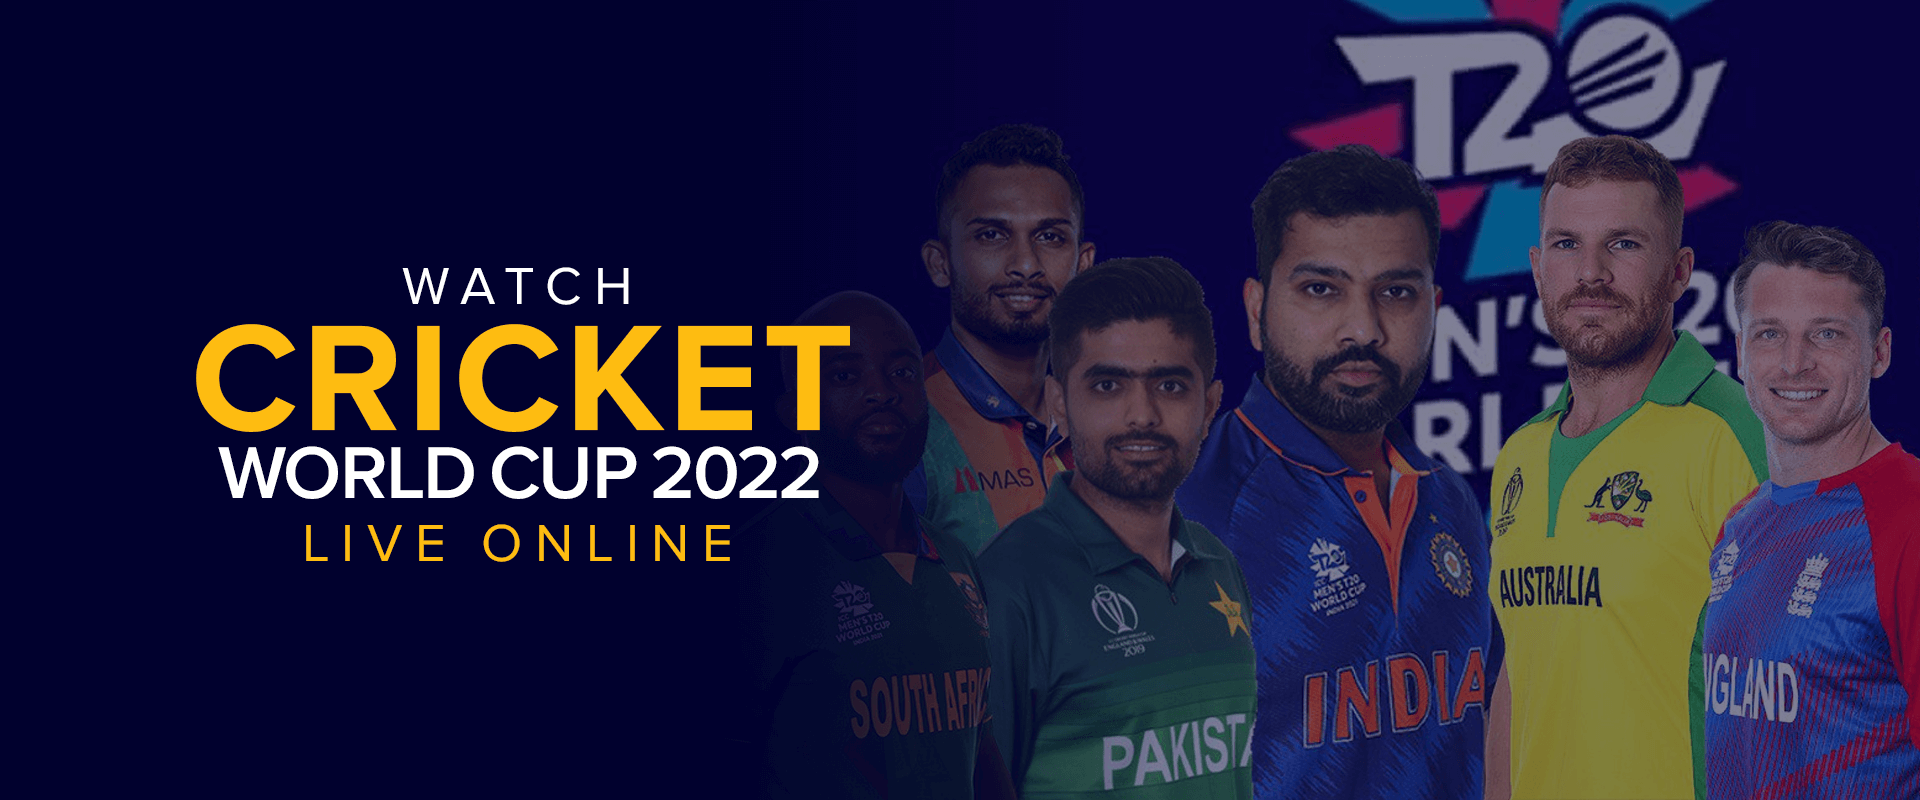 How to Watch Cricket World Cup 2022 Live Online